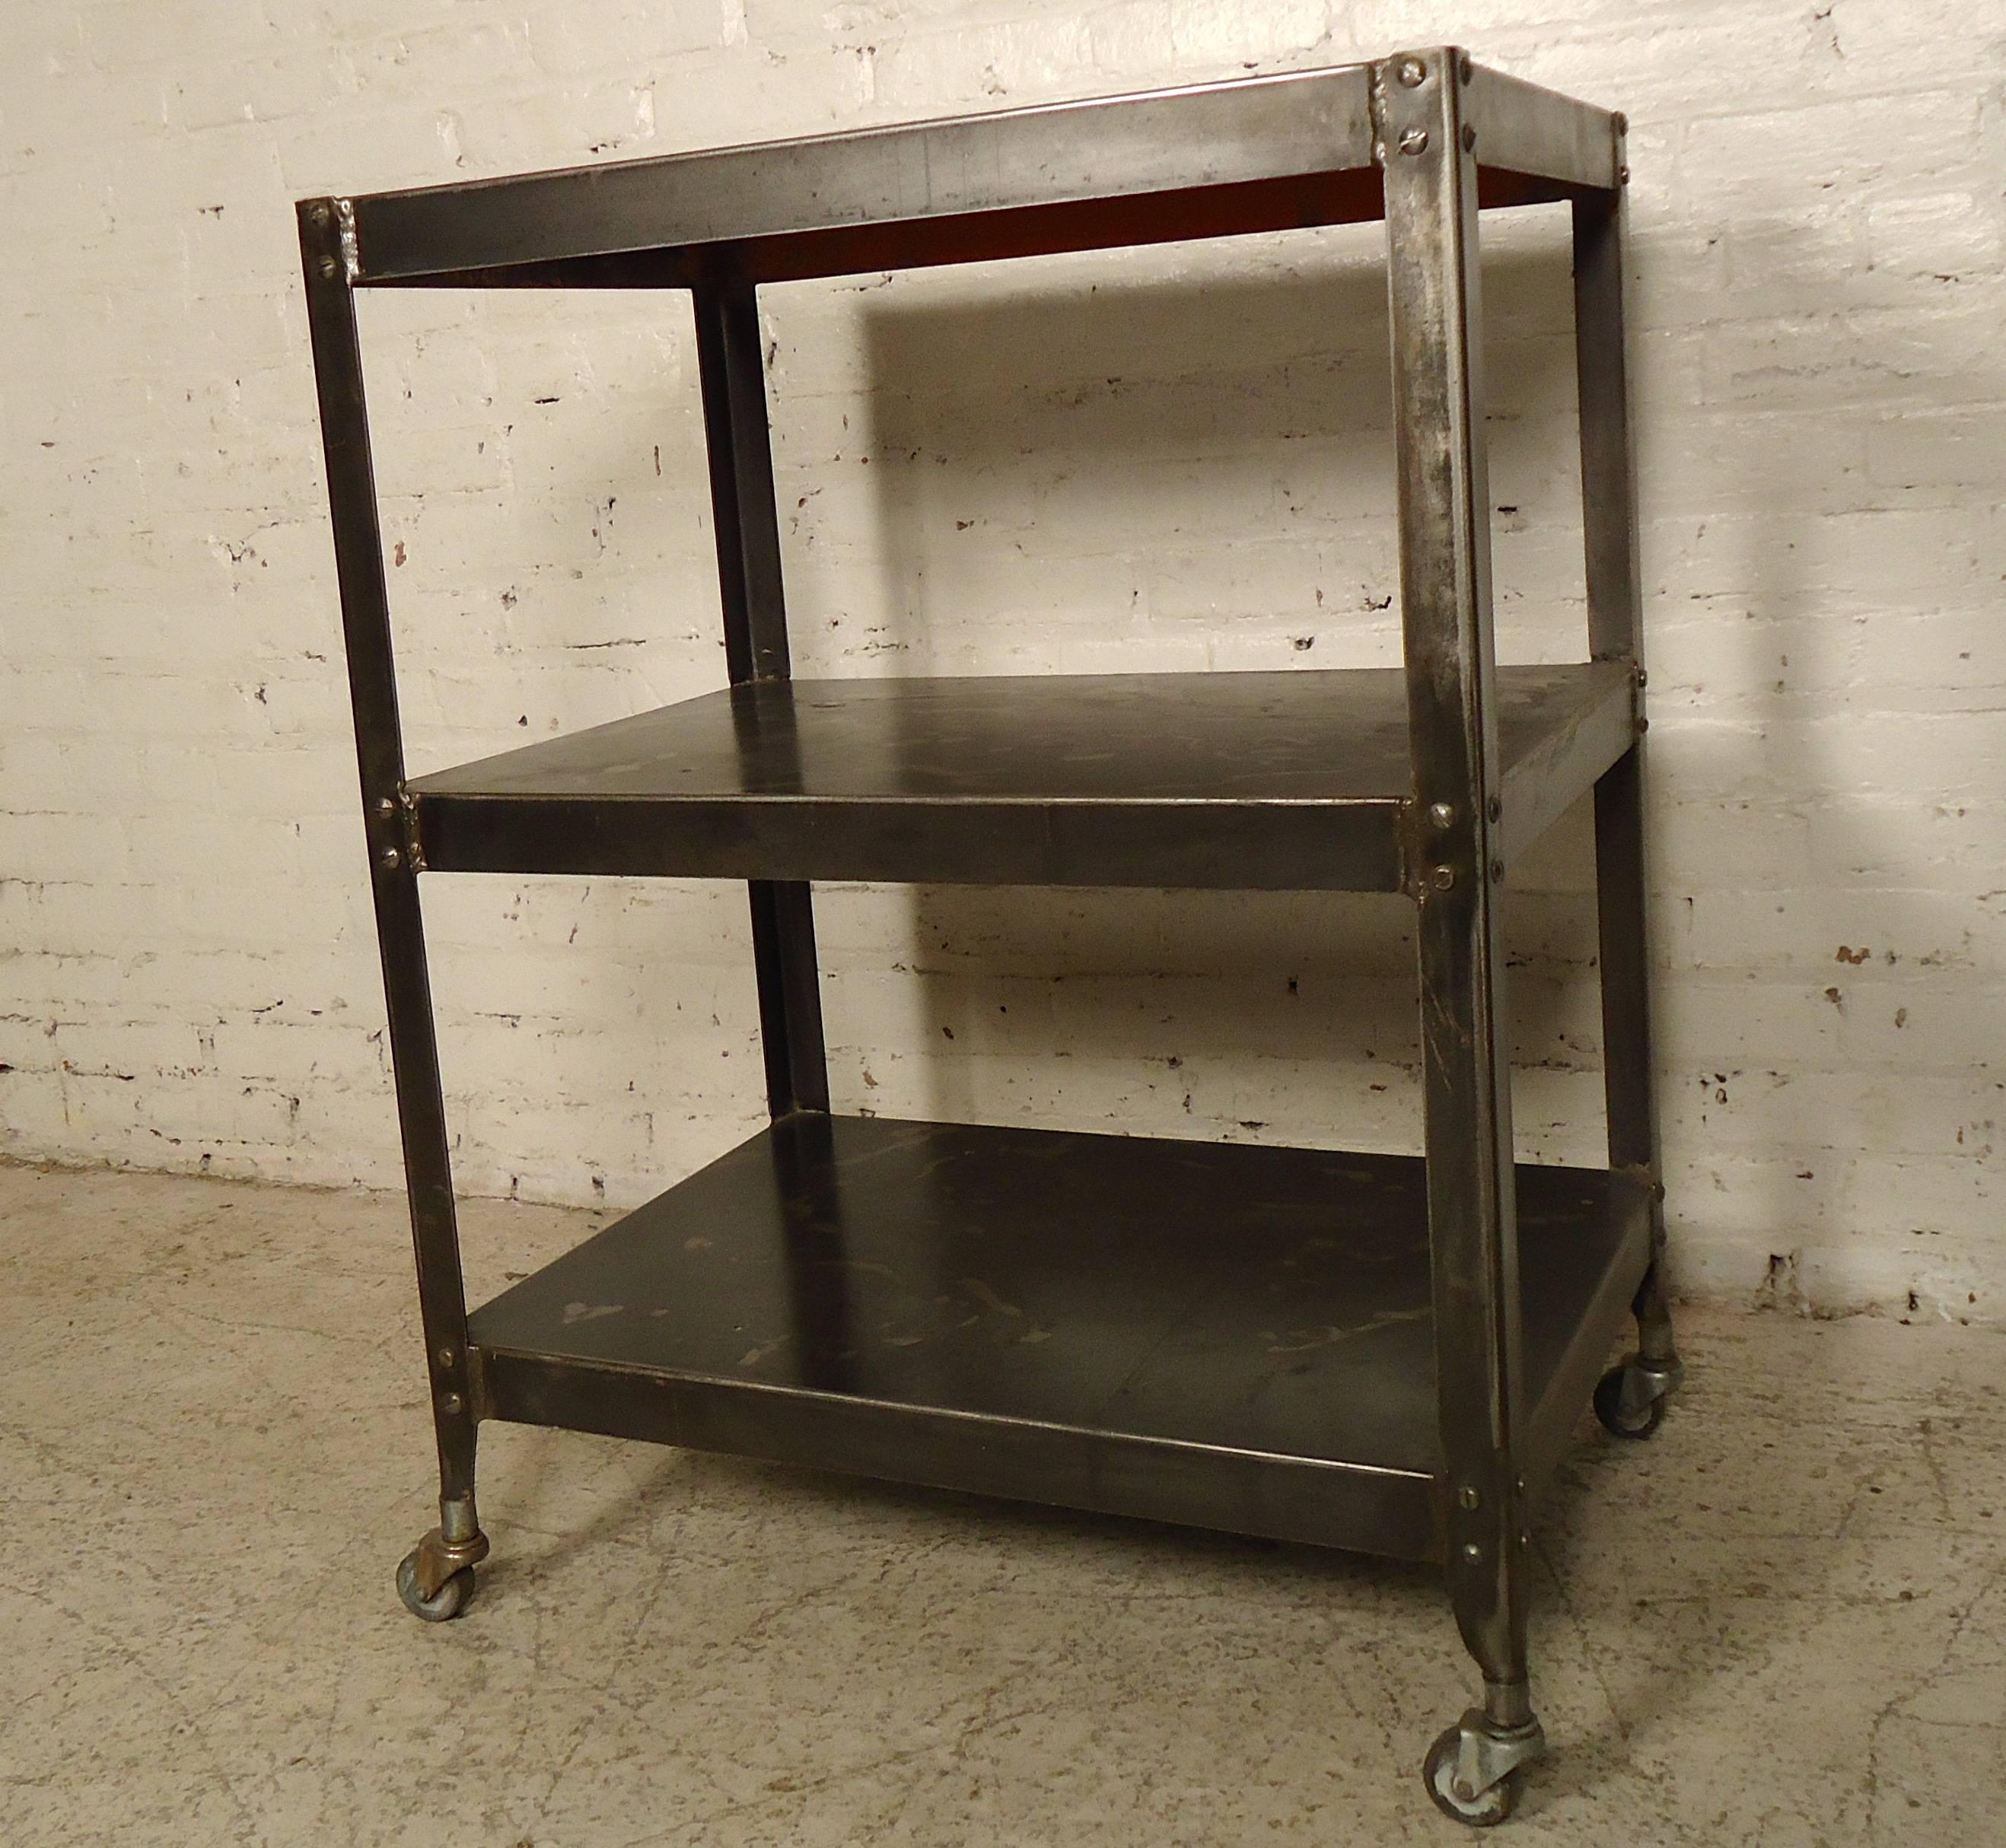 Industrial metal rolling cart with three deep shelves, small caster wheels and heavy Industrial metal. Piece has been stripped and refinished in a bare metal, Industrial style finish.

(Please confirm item location NY or NJ with dealer).